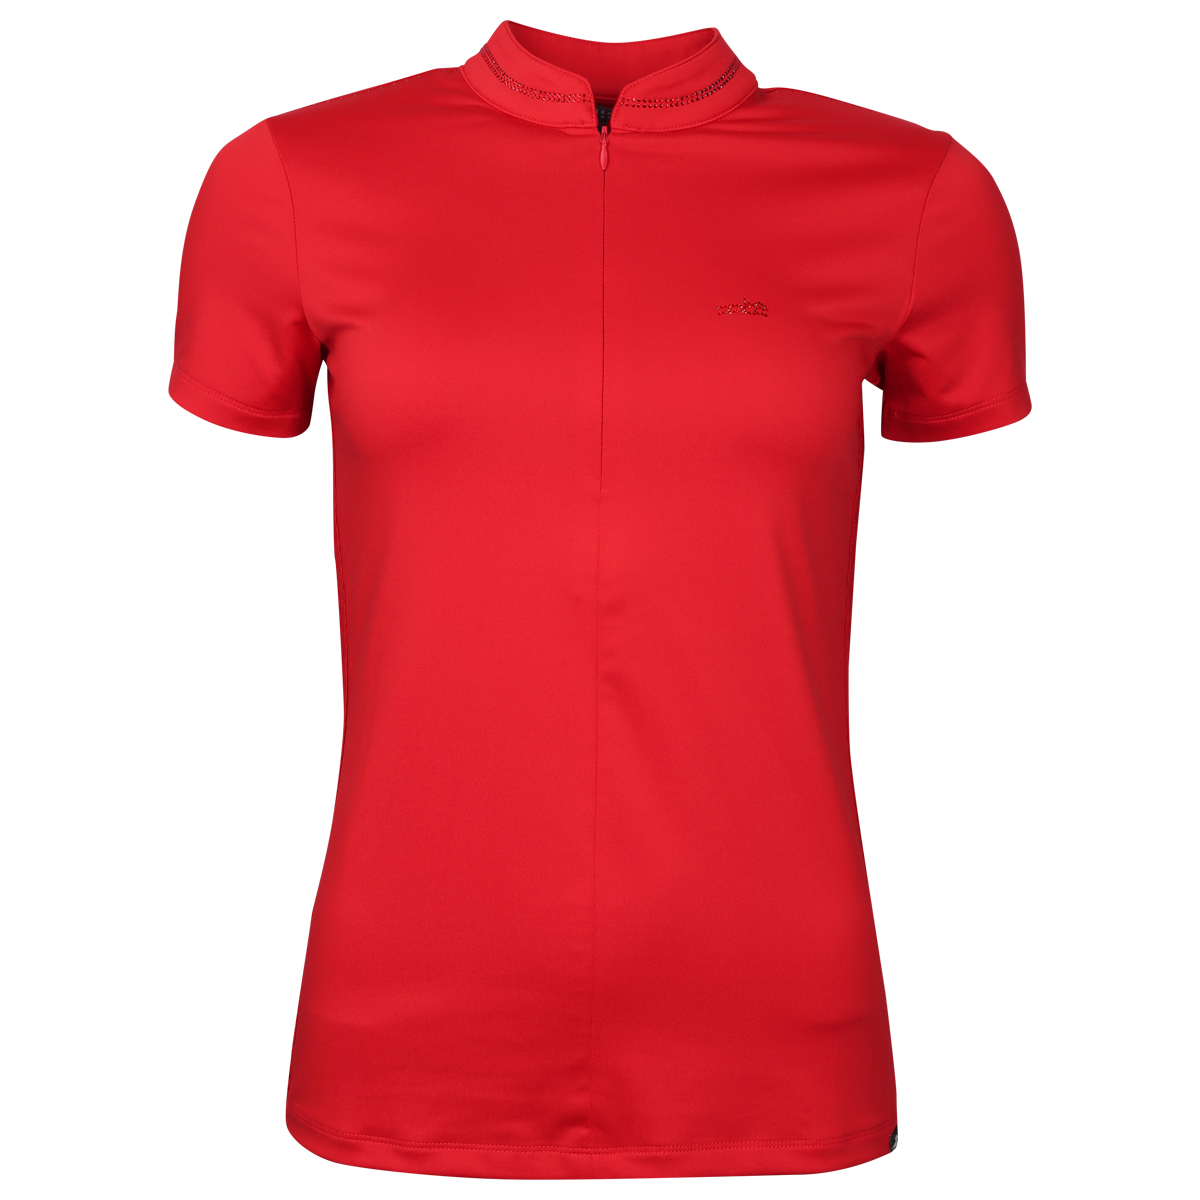 Trainingsshirt Schockemöhle Summer Page Rood, L in rood